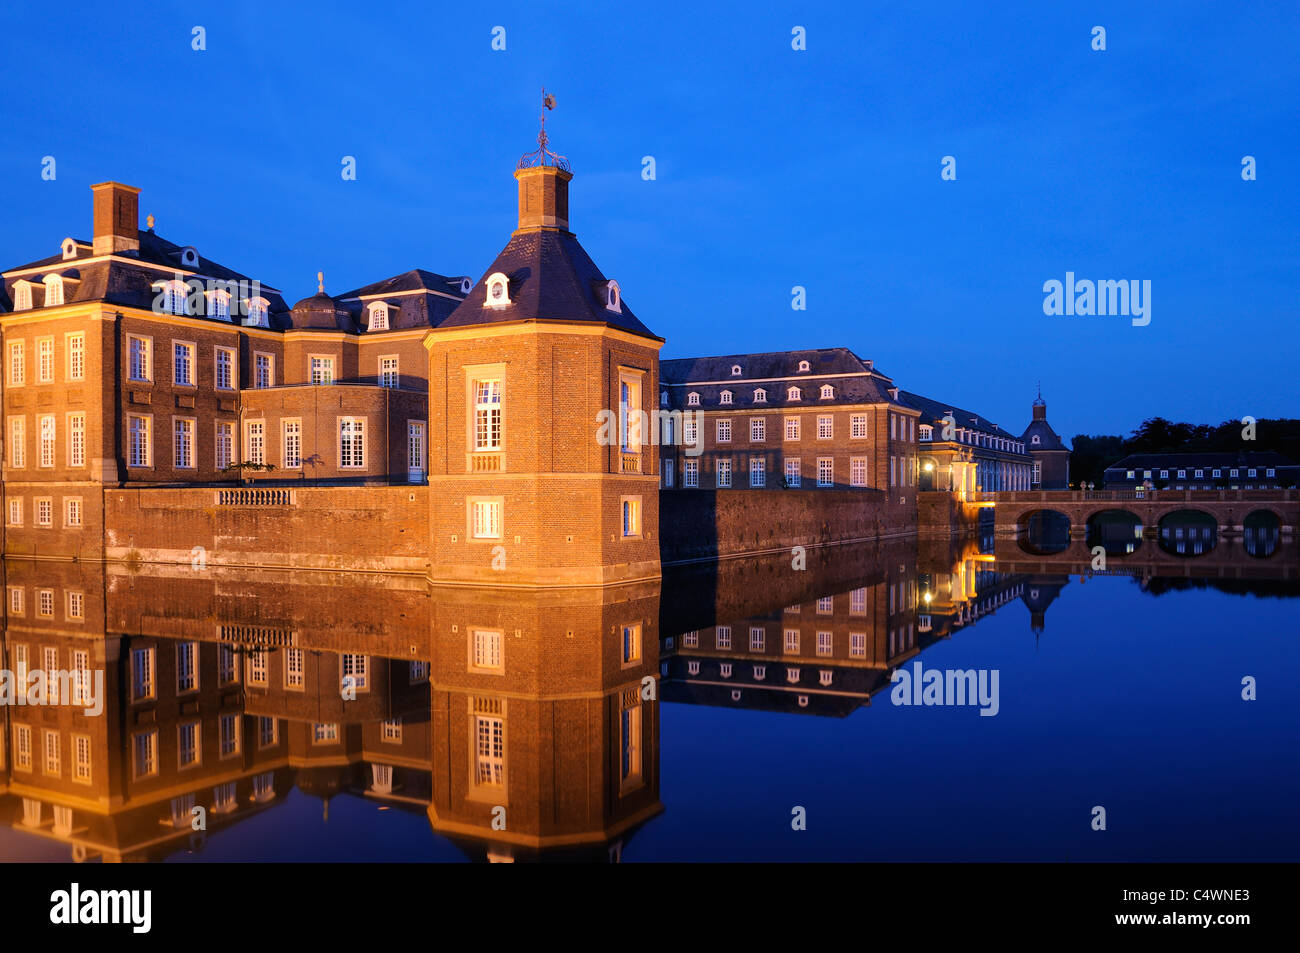 Night shot of a grand water castle in Nordkirchen, Westphalia, Germany. Stock Photo